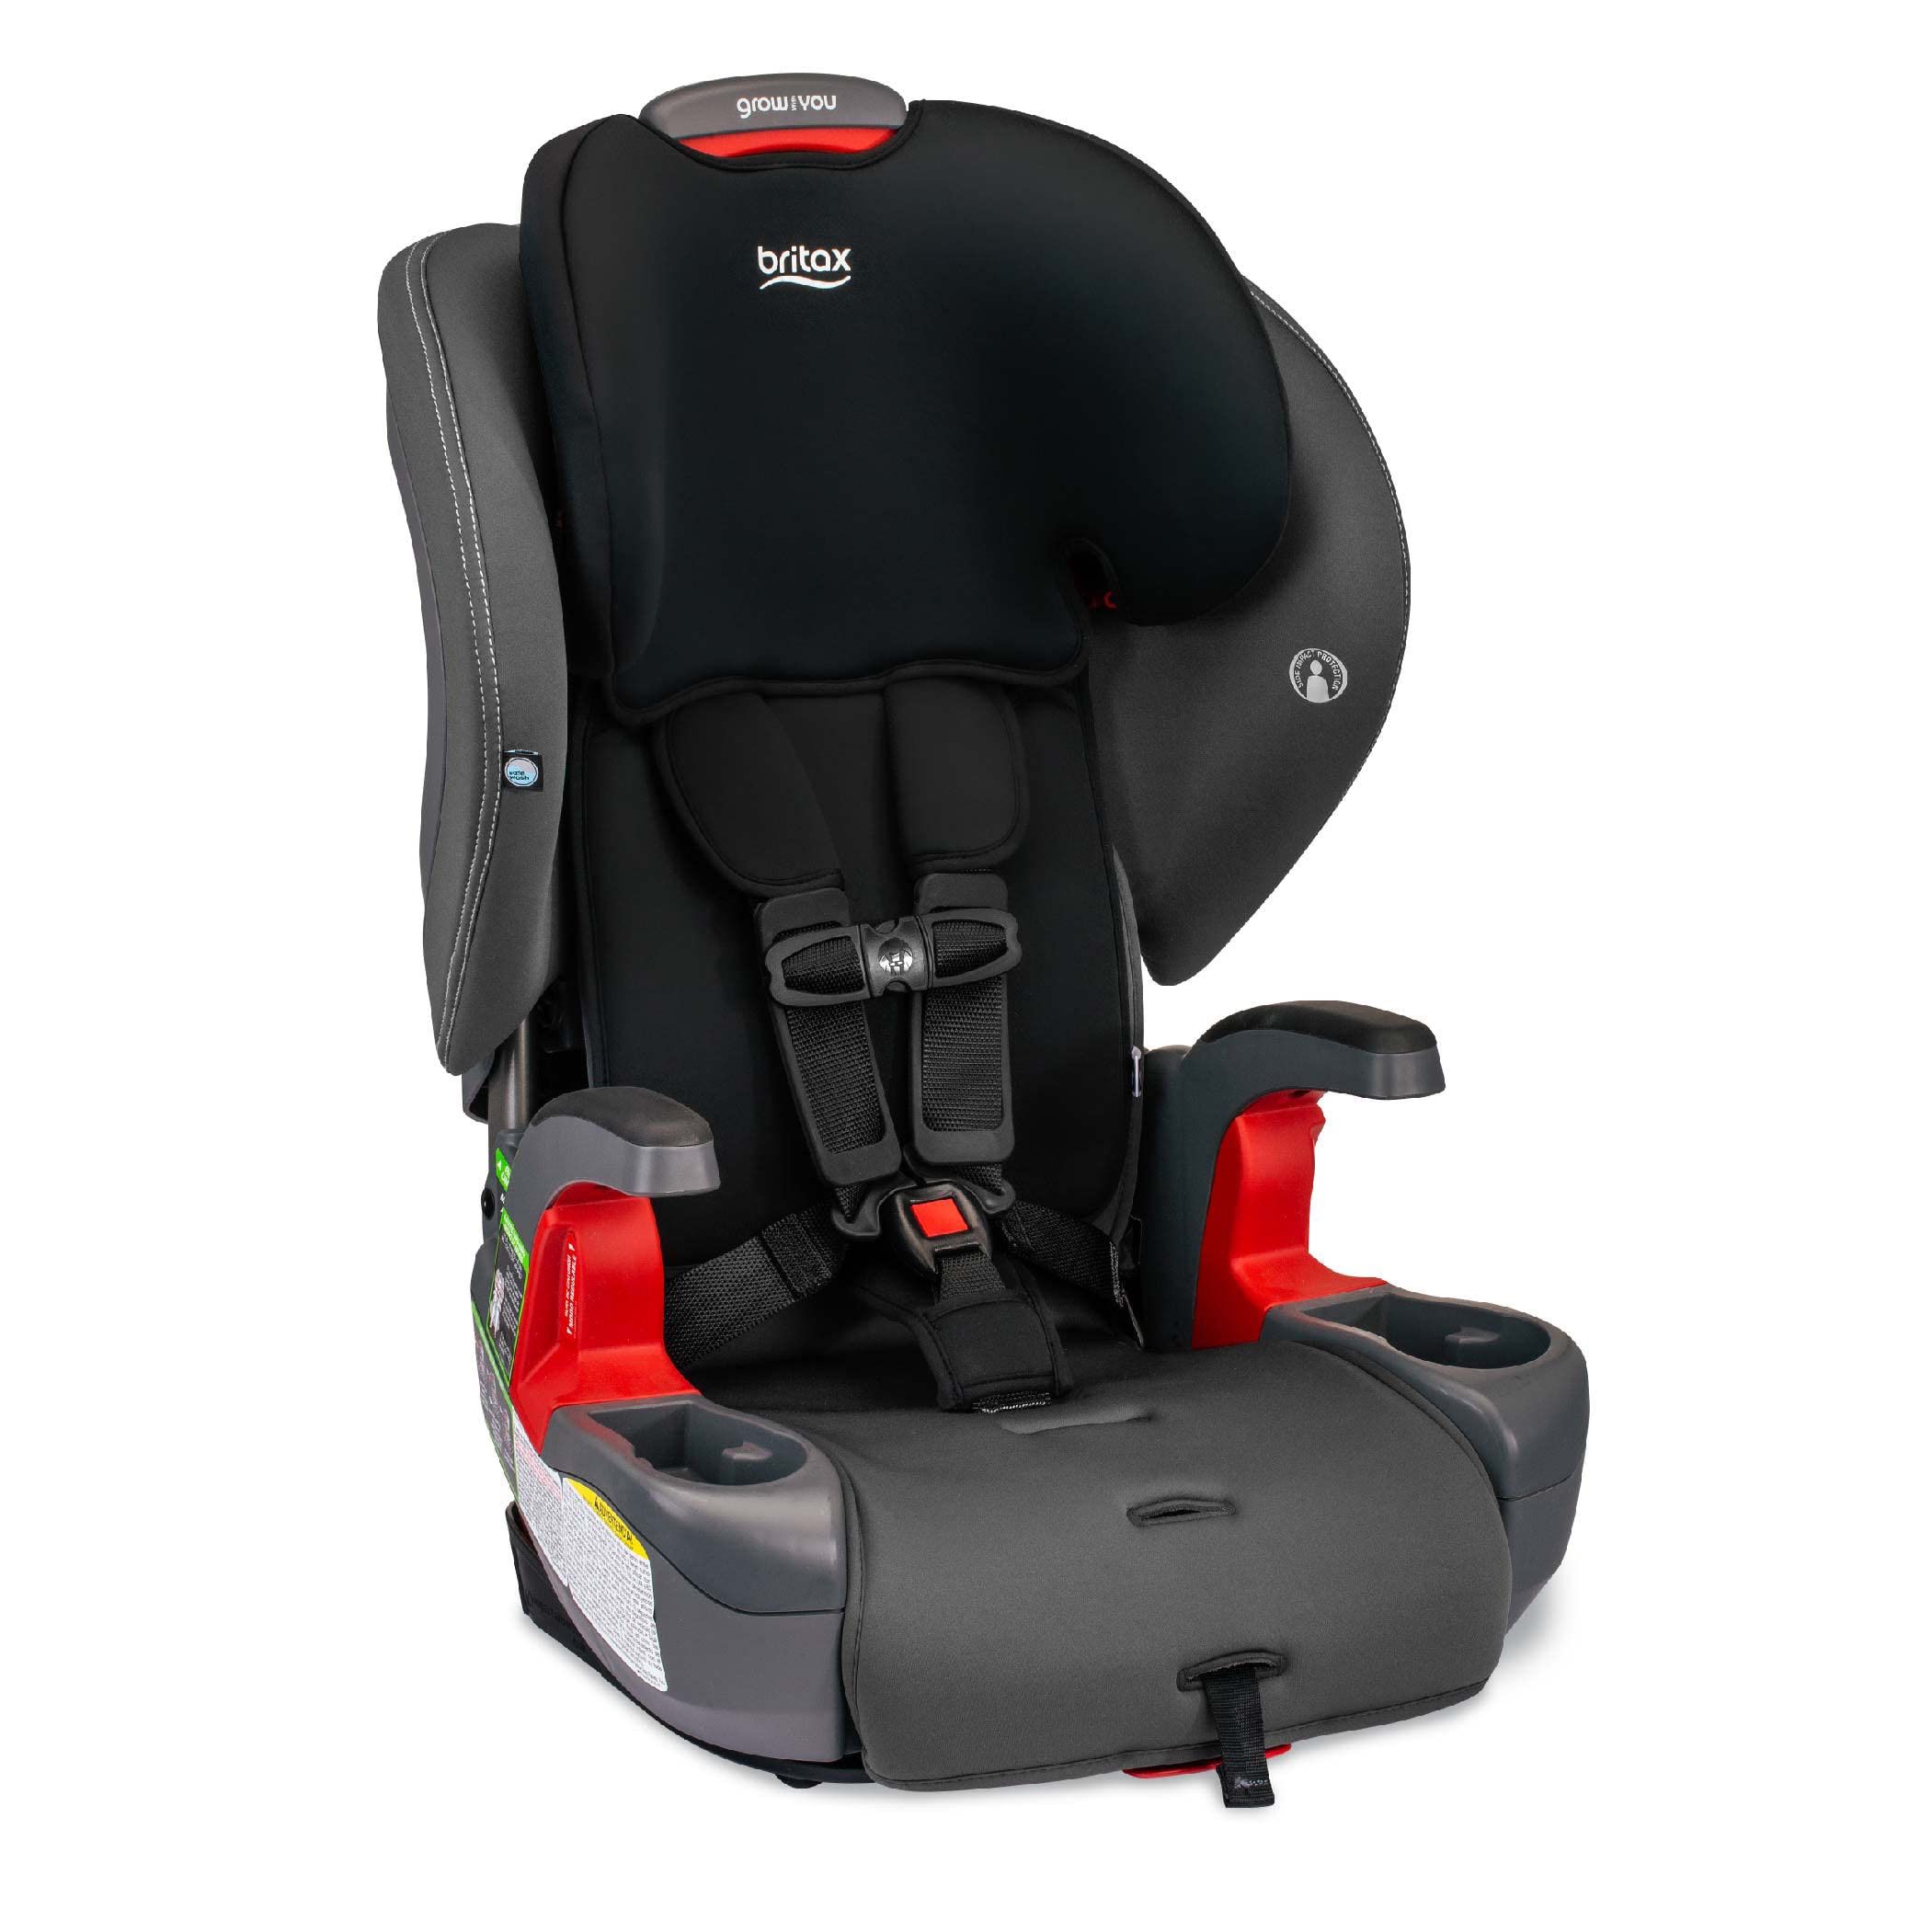 (NEW) Britax Grow With You Harness-2-Booster Car Seat